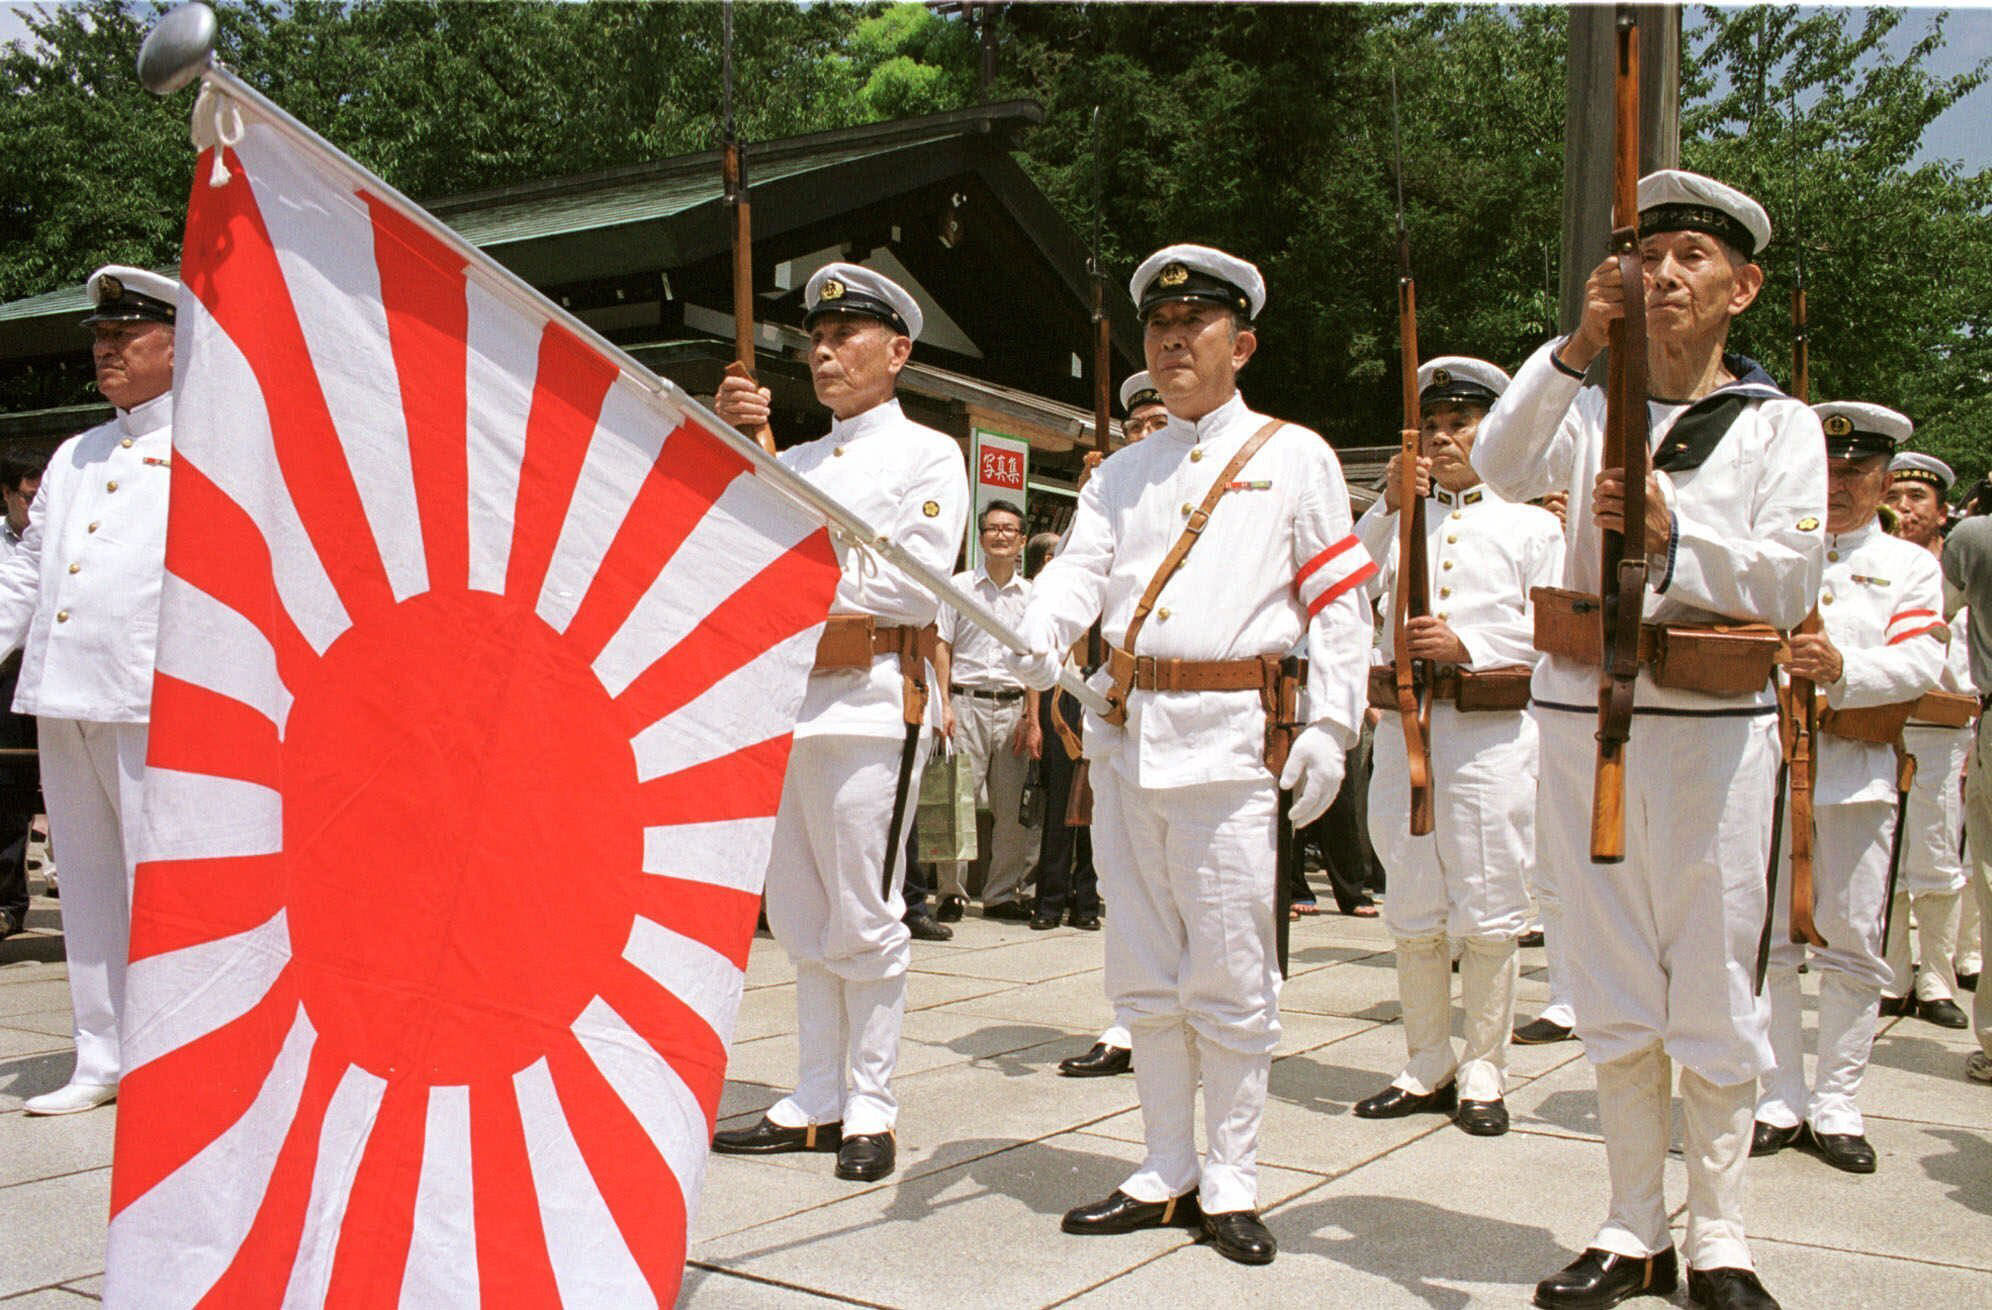 Japanese war veterans in the country's Imperial Navy uniform stand at attention with the navy flag as they pay their respects to the war dead at Tokyo's Yasukuni Shrine to commemorate the 54th anniversary of the end of World War II on Aug. 15, 1999. | AP